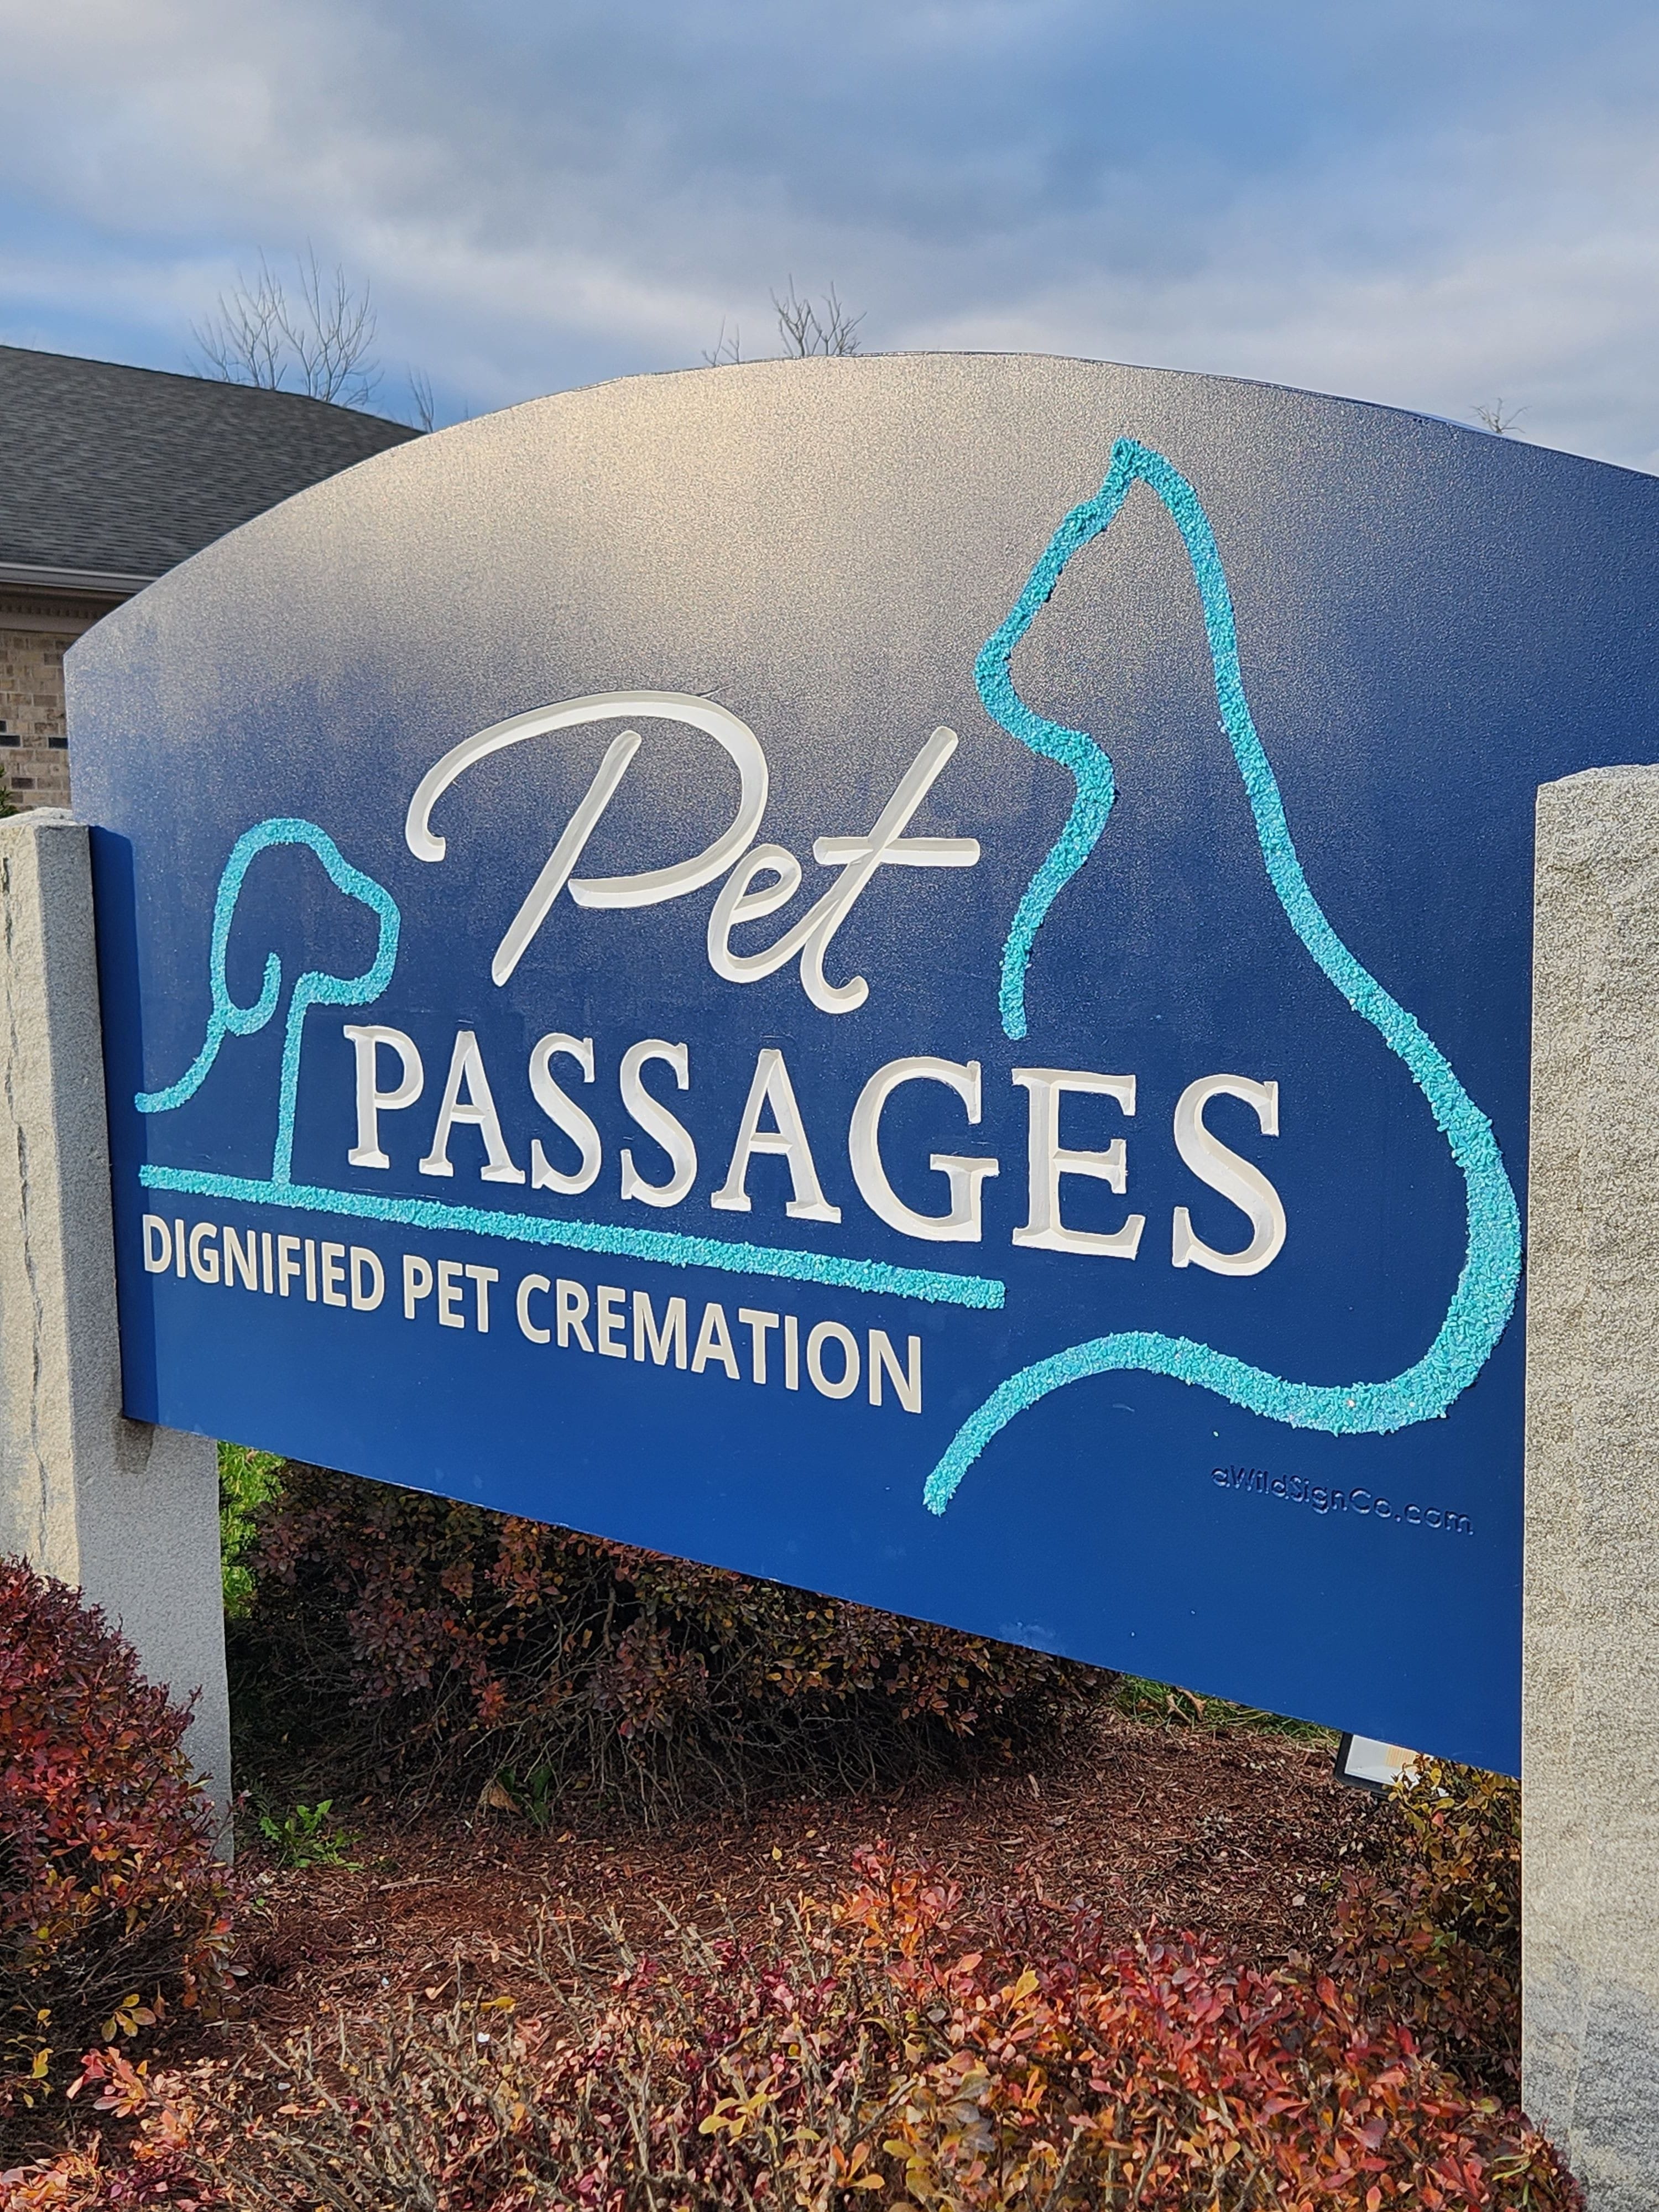 Their creativity sets our sign apart from others!  Adding smaltz, or crushed glass, to our project gives it higher visibility over standard signs.